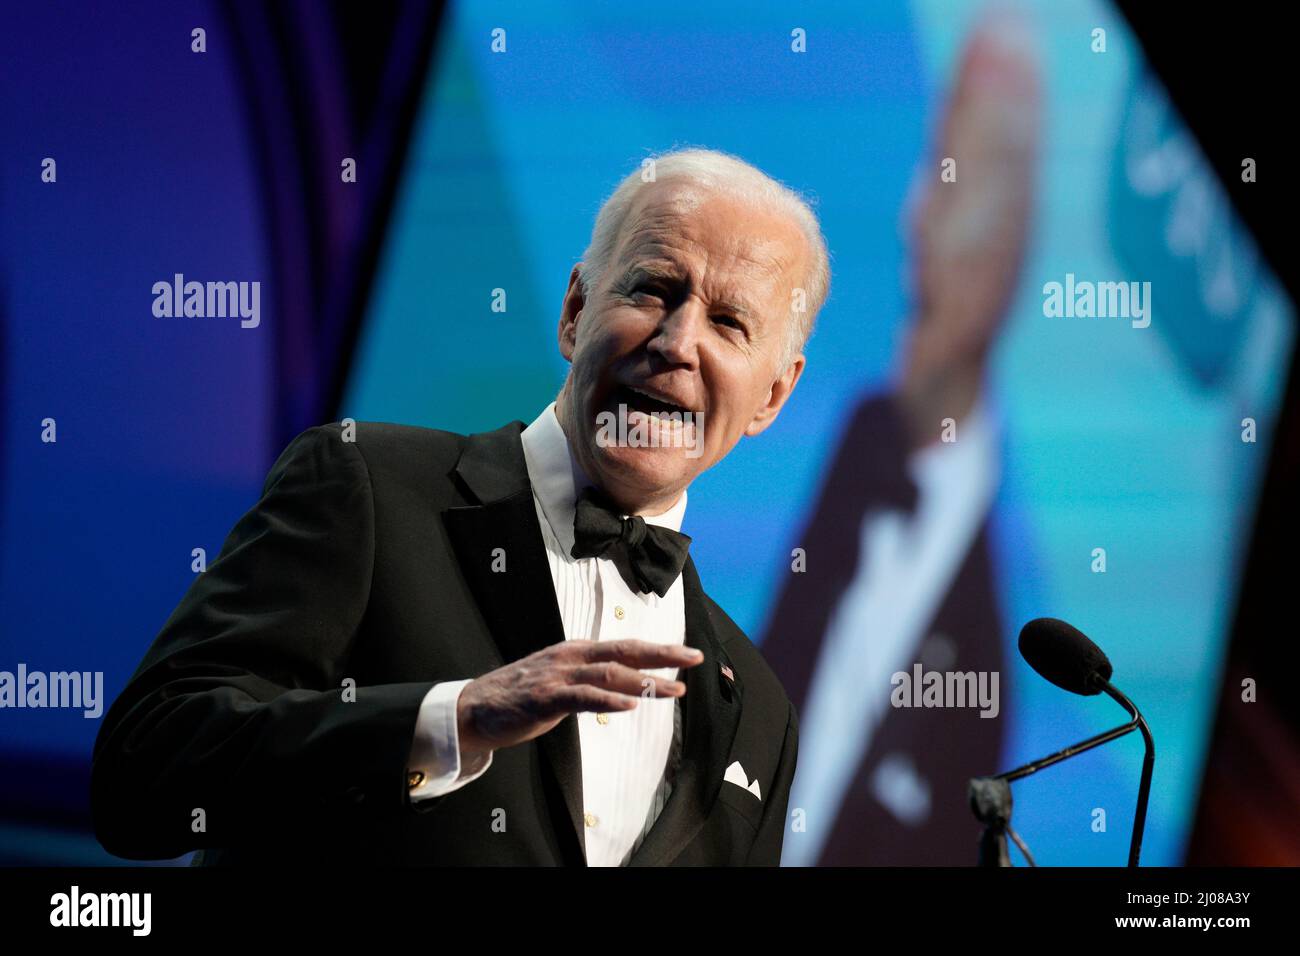 United States President Joe Biden delivers remarks at The Ireland Funds 30th National Gala in the  National Building Museum in Washington on March 16, 2022. Credit: Yuri Gripas / Pool via CNP /MediaPunch Stock Photo